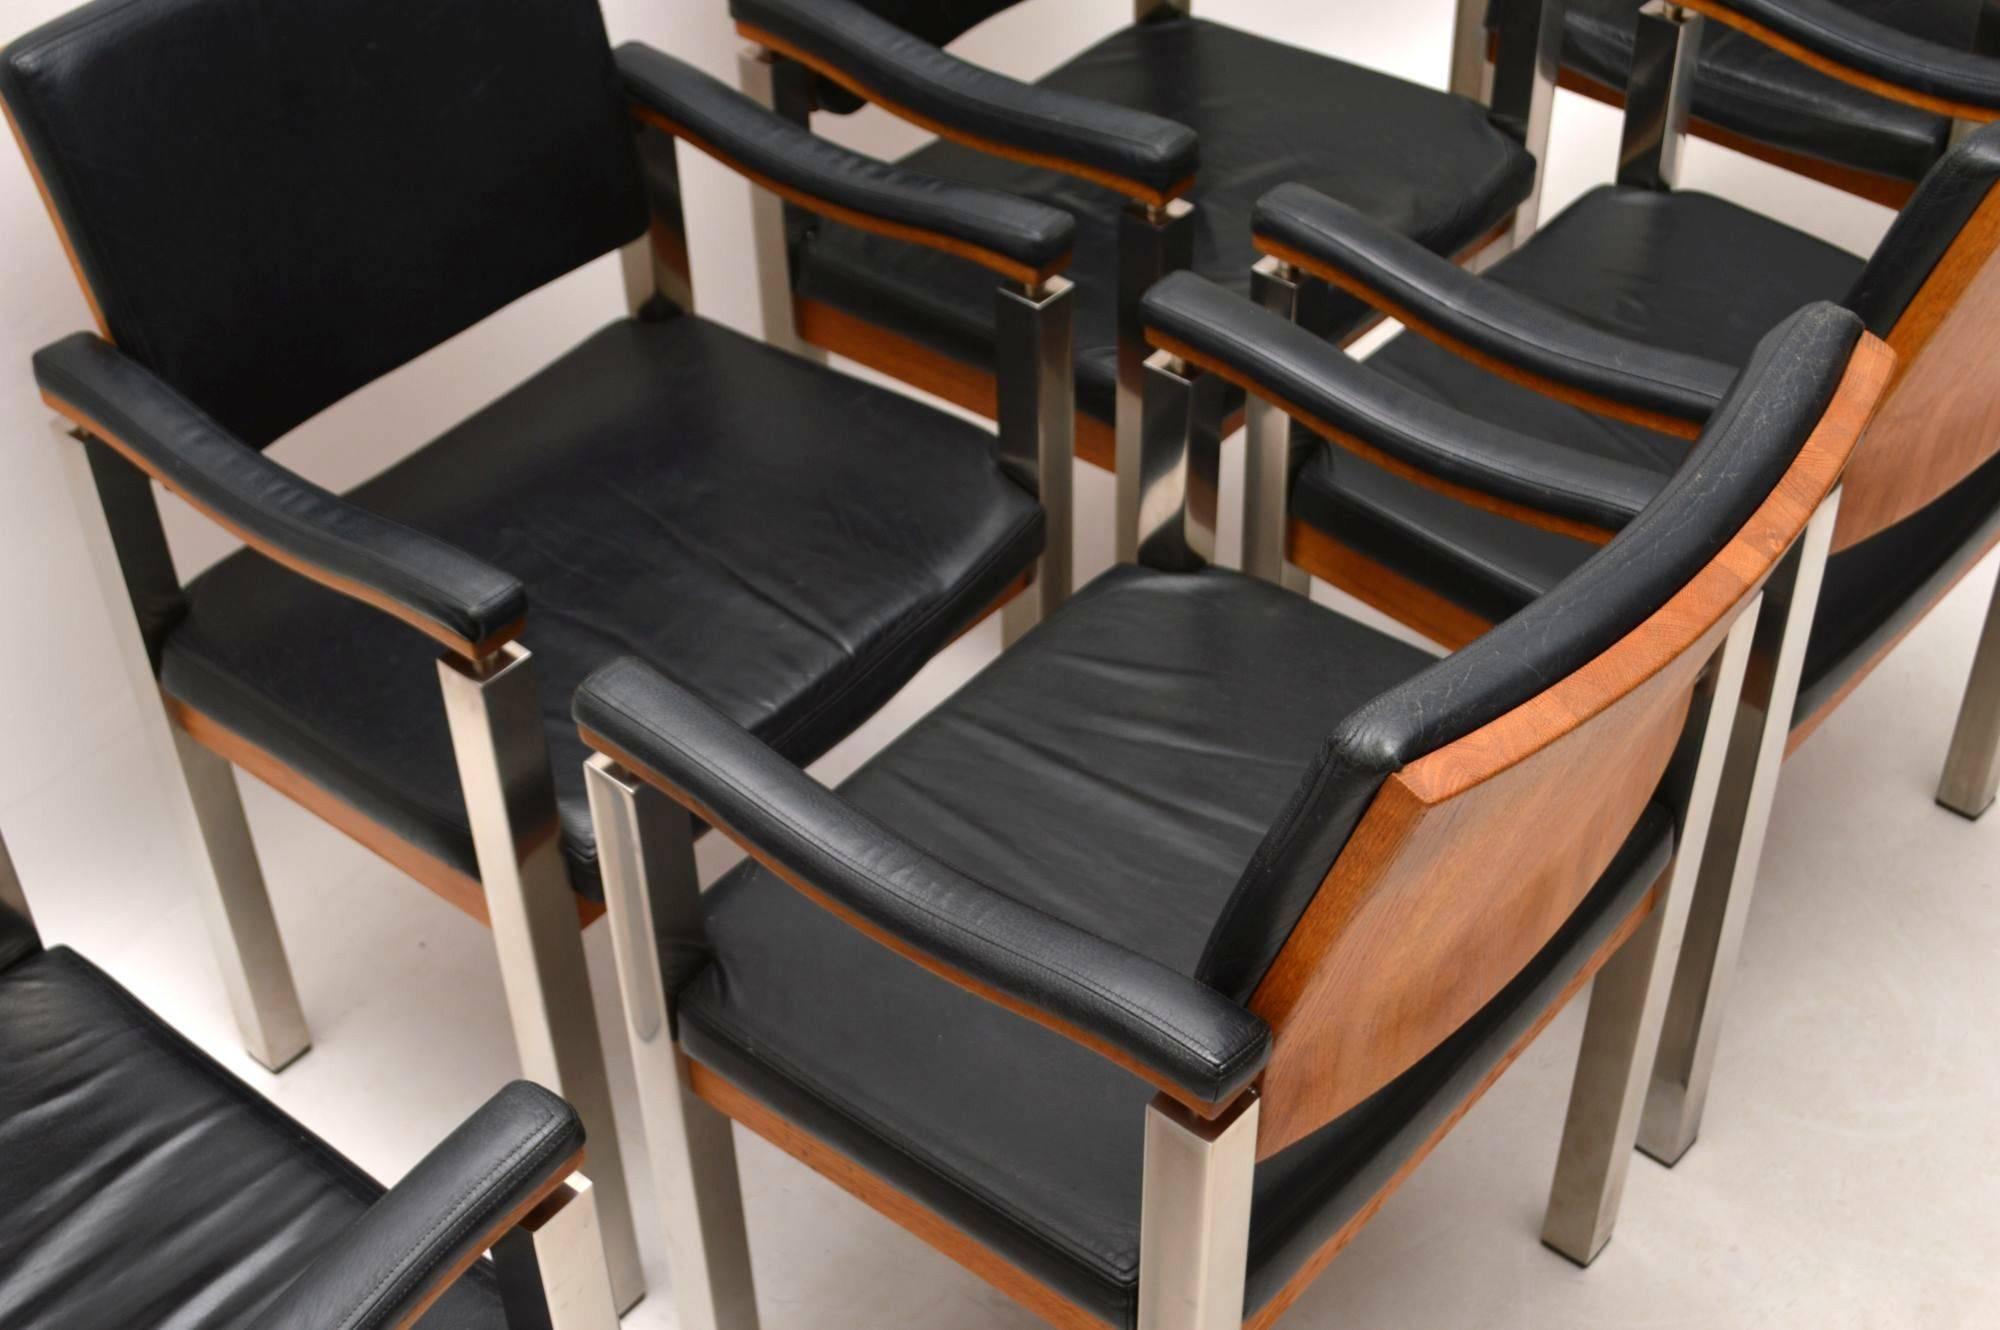 A very unusual and very stylish set of six dining chairs, these date from around the 1970s. They are very well made and are extremely comfortable. The condition is excellent for their age, with only some very minor wear here and there. The black